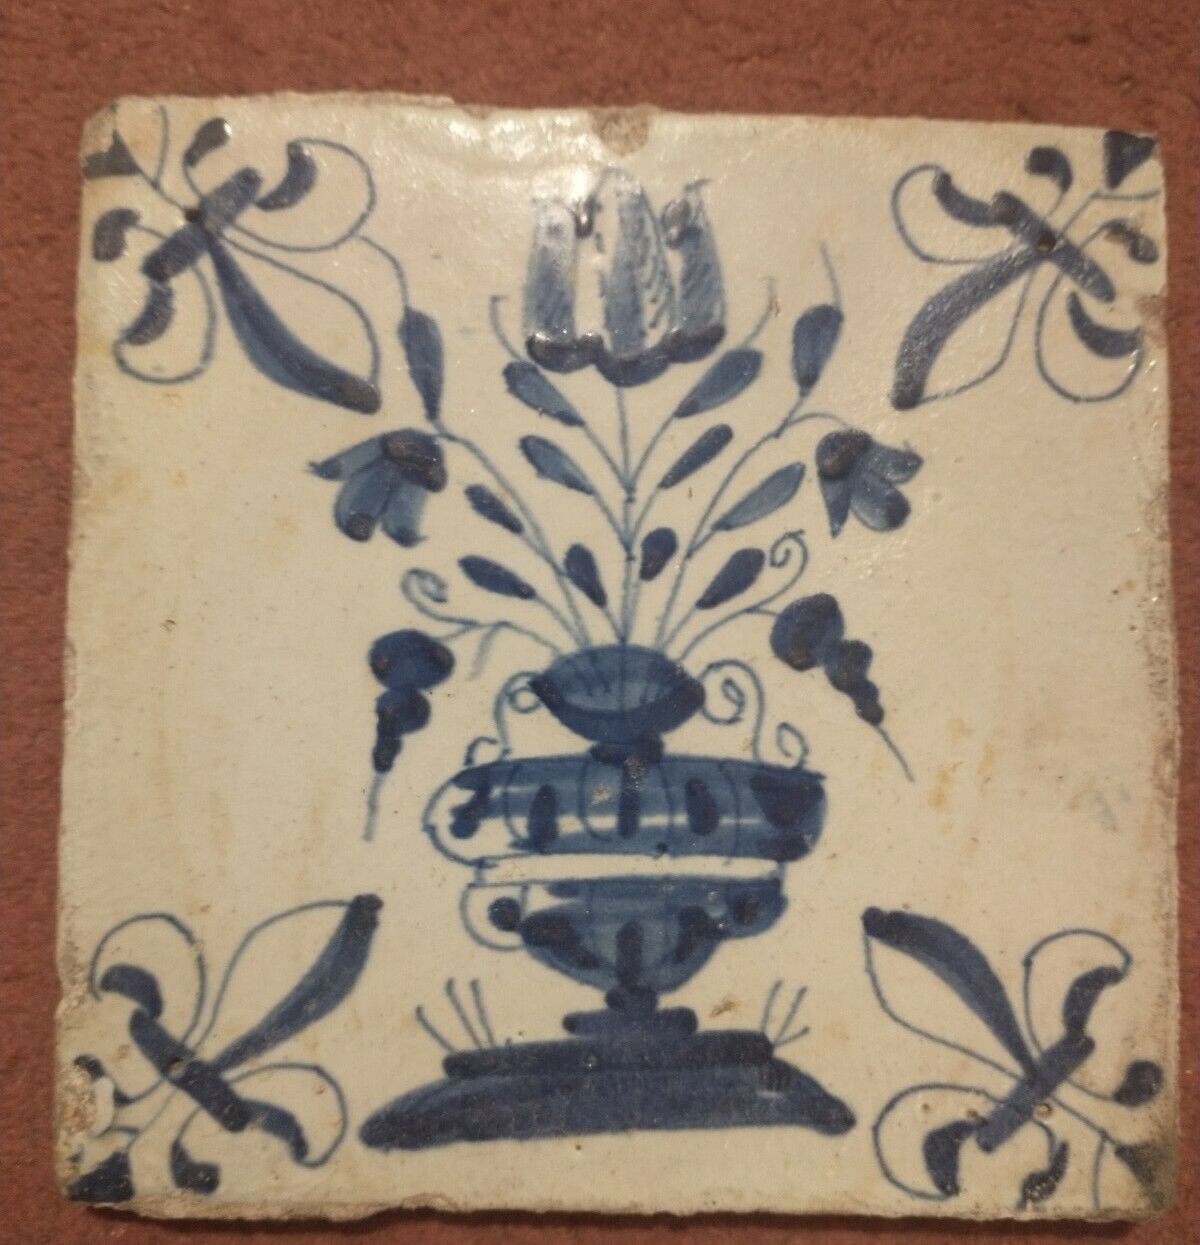 Charming 17th Century Delft ceramic tile with flowers in a vase  13cm x 13cm